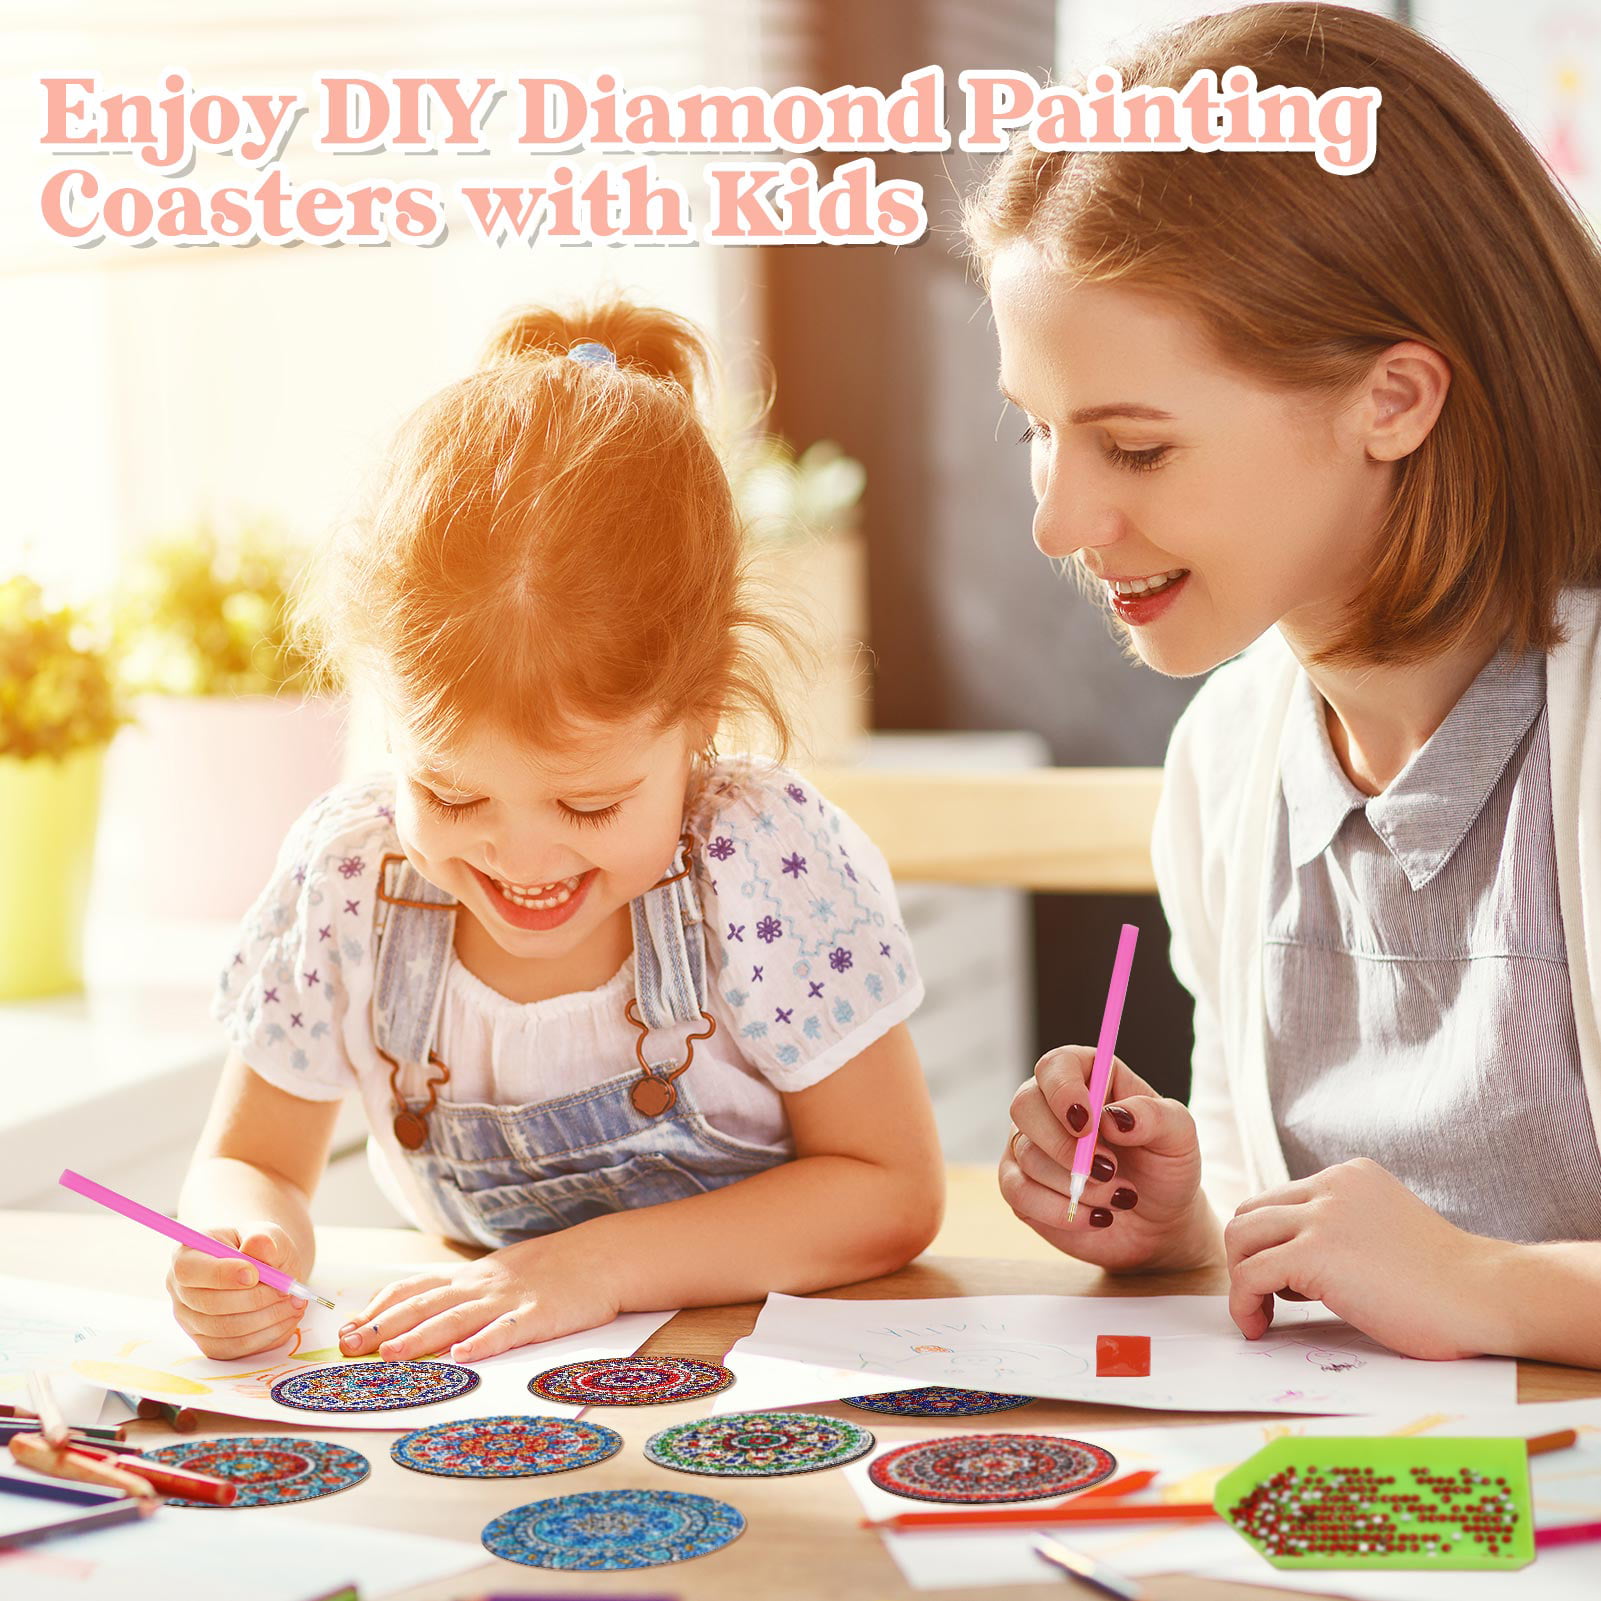 BSRESIN 8 Pcs Coasters with Holder, Mandala DIY Diamond Art Crafts for  Adults, Small Diamond Painting Kits Accessories